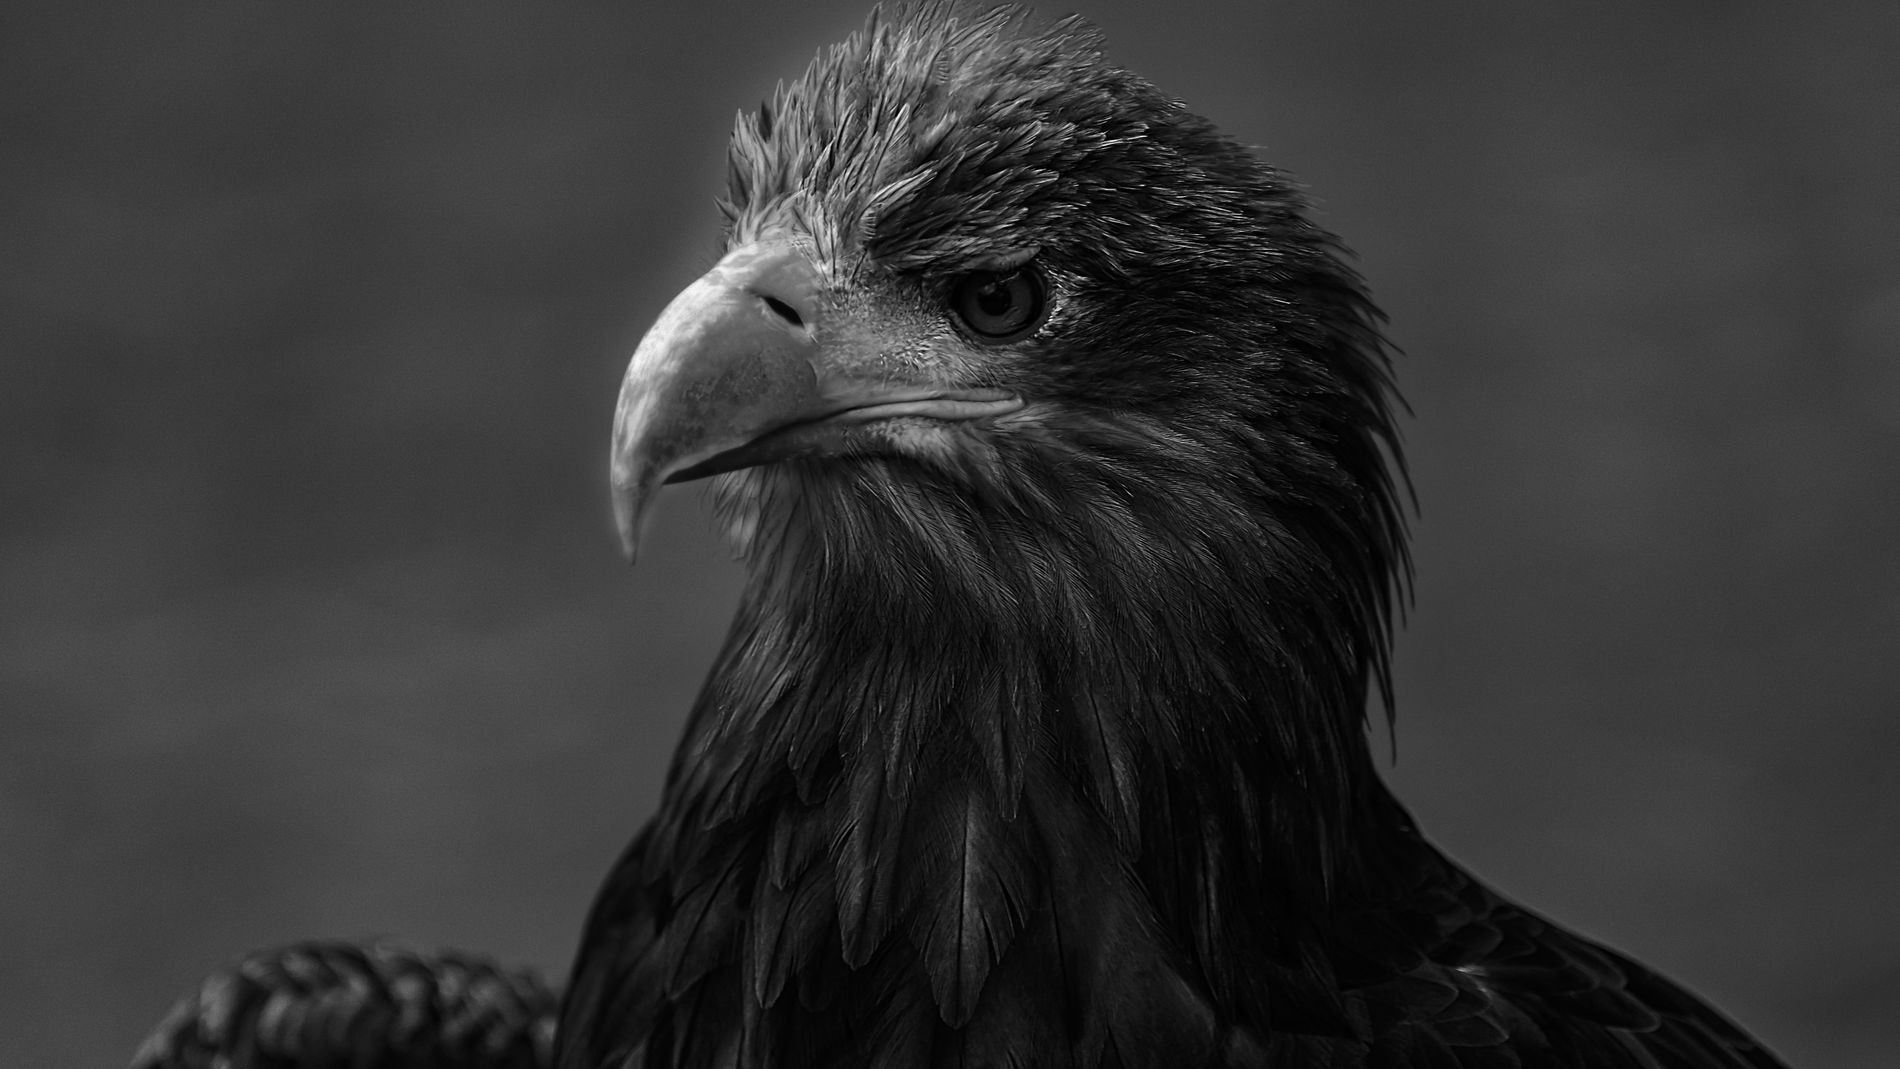 100+] Eagle Wallpapers | Wallpapers.com